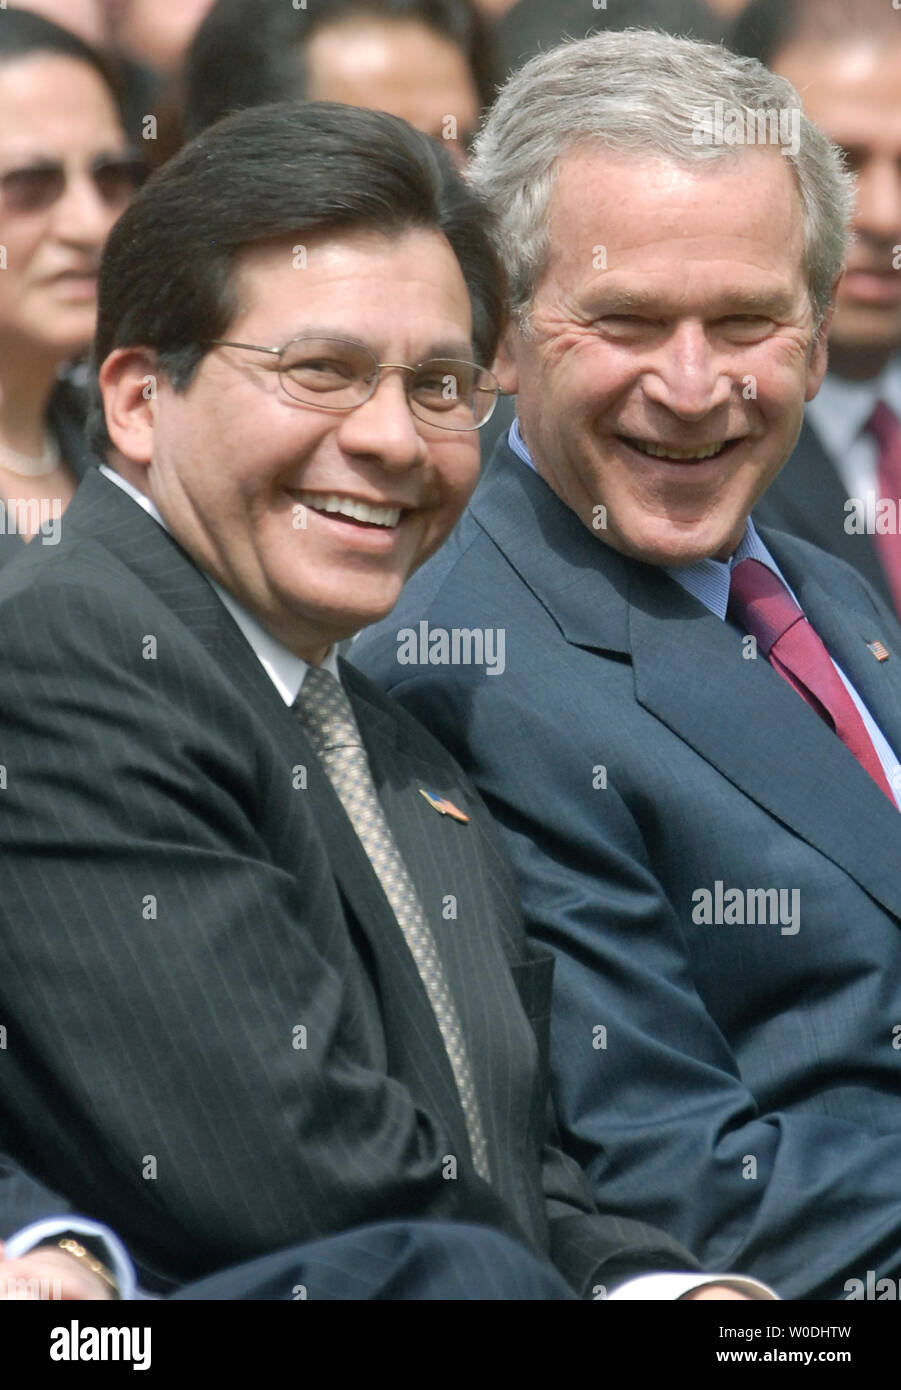 U.S. President George W. Bush (R) sits next to U.S. Attorney General Alberto Gonzales at a Cinco de Mayo celebration in the Rose Garden at The White House in Washington on May 4, 2007. (UPI Photo/Kevin Dietsch) Stock Photo